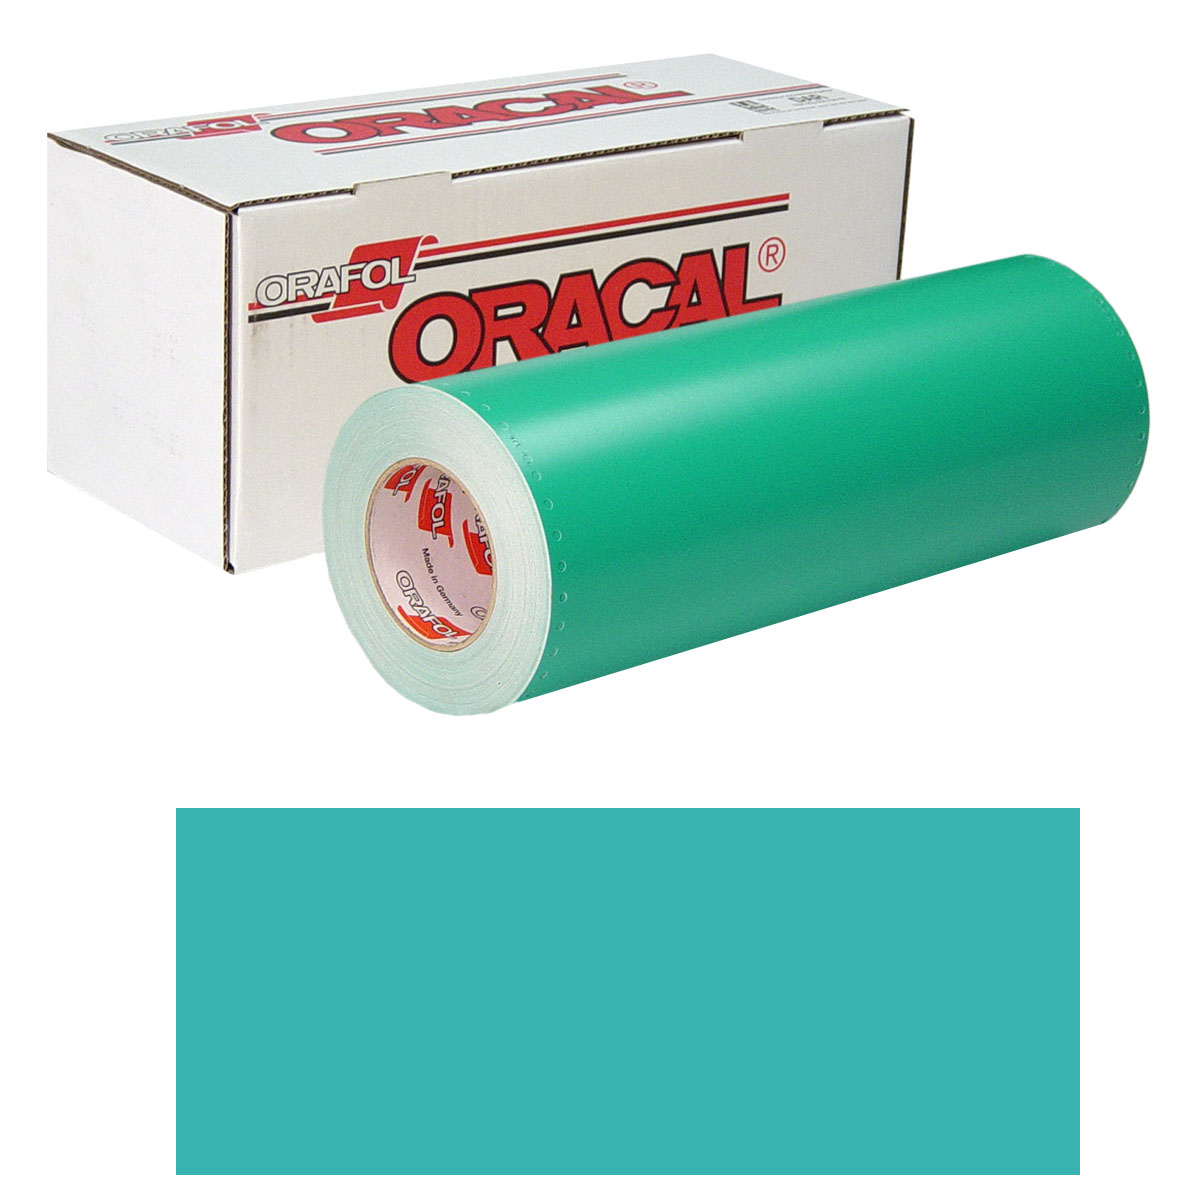 ORACAL 8500 15in X 10yd 054 Turquoise